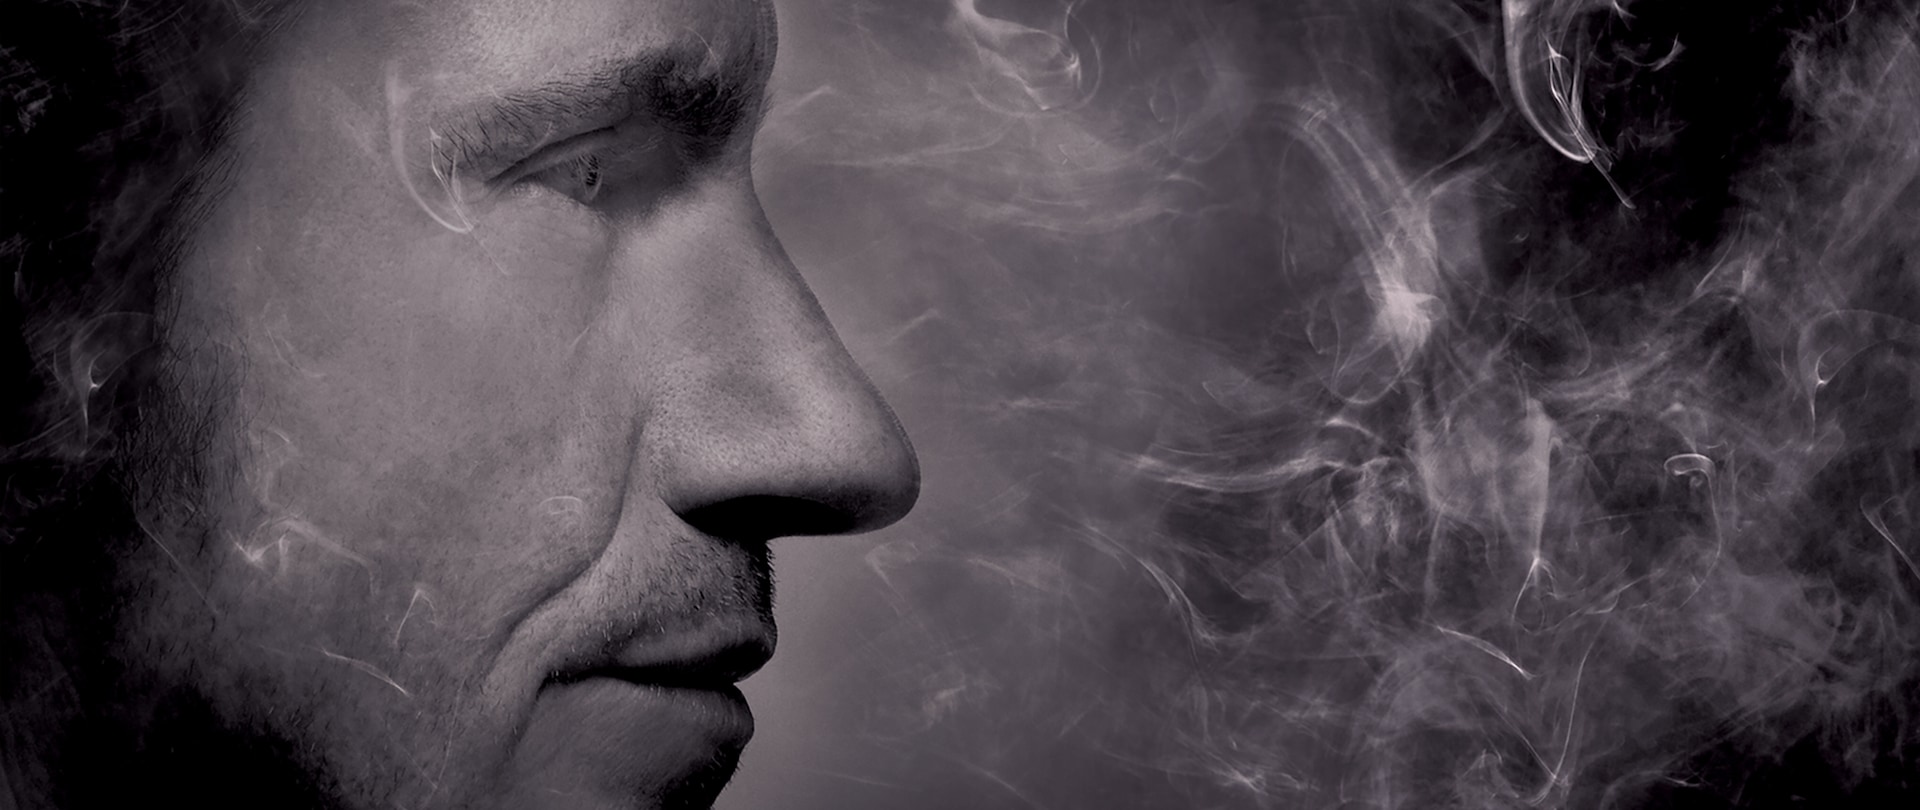 Grayscale close-up side profile of Denis Leary with smoke plumes surrounding his face for FX's Rescue Me